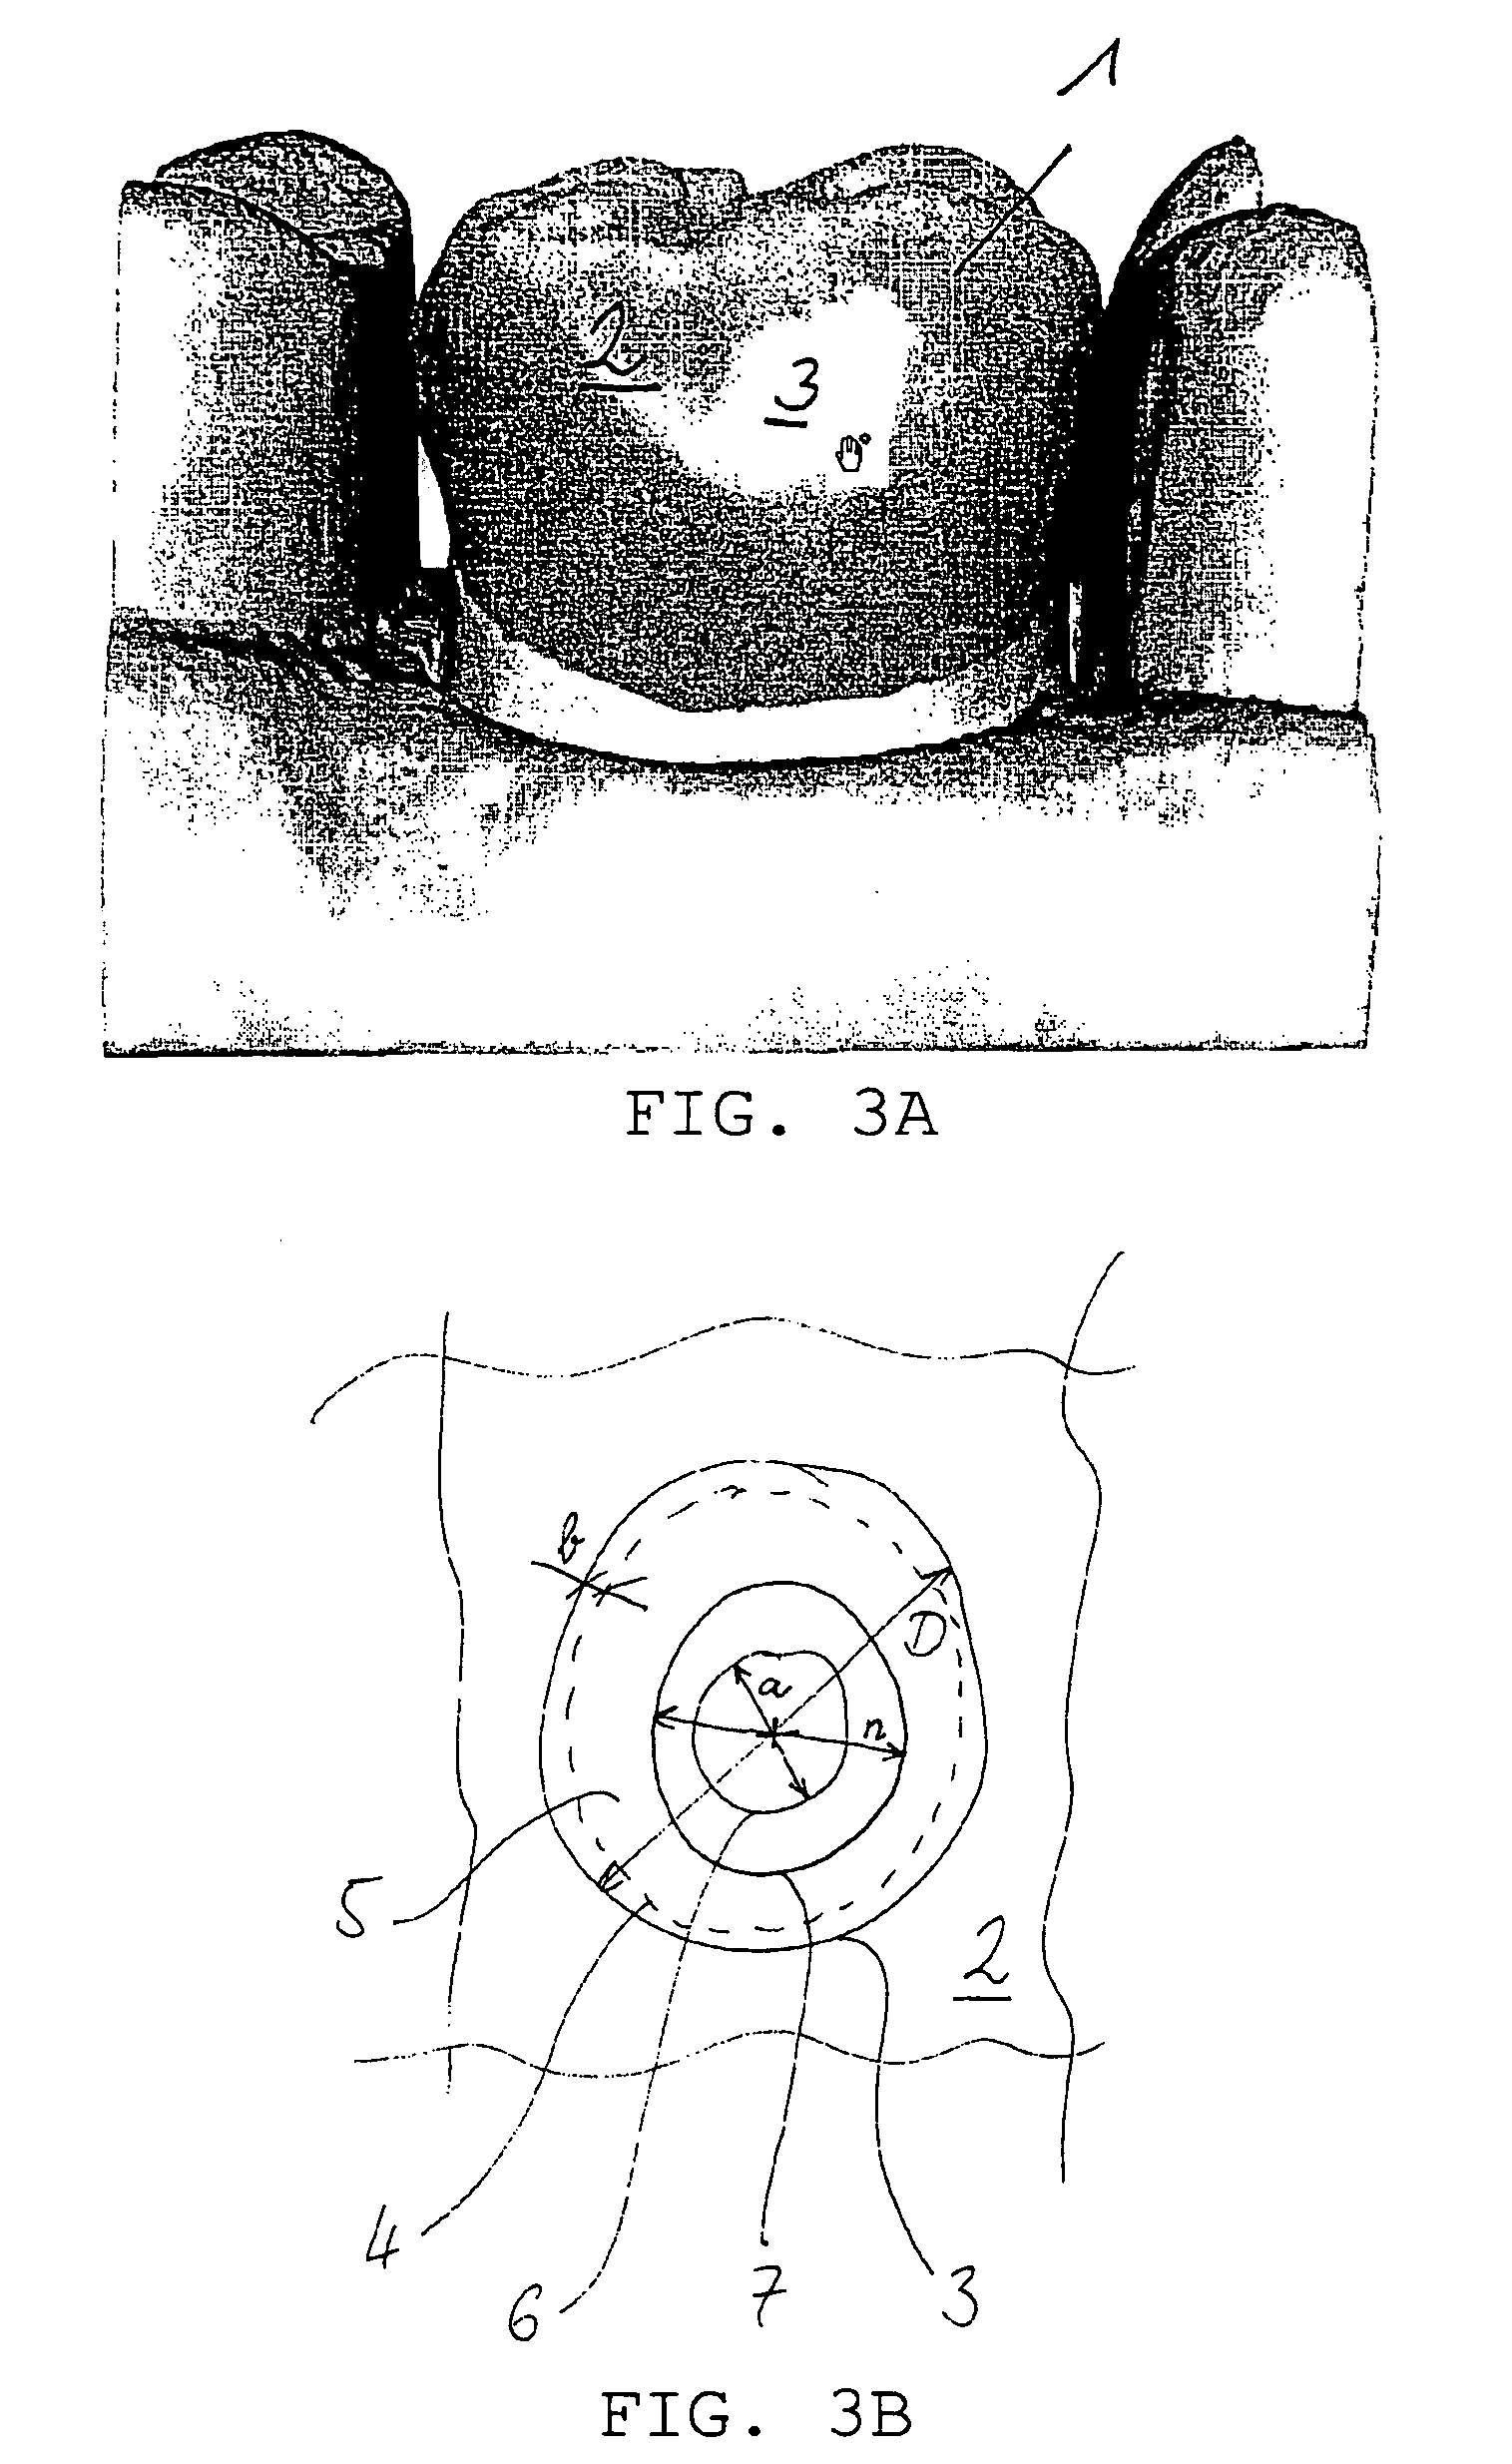 Method of processing a digitized workpiece, particularly a three-dimensional model of a dental prosthetic item to be produced therefrom, and apparatus therefor